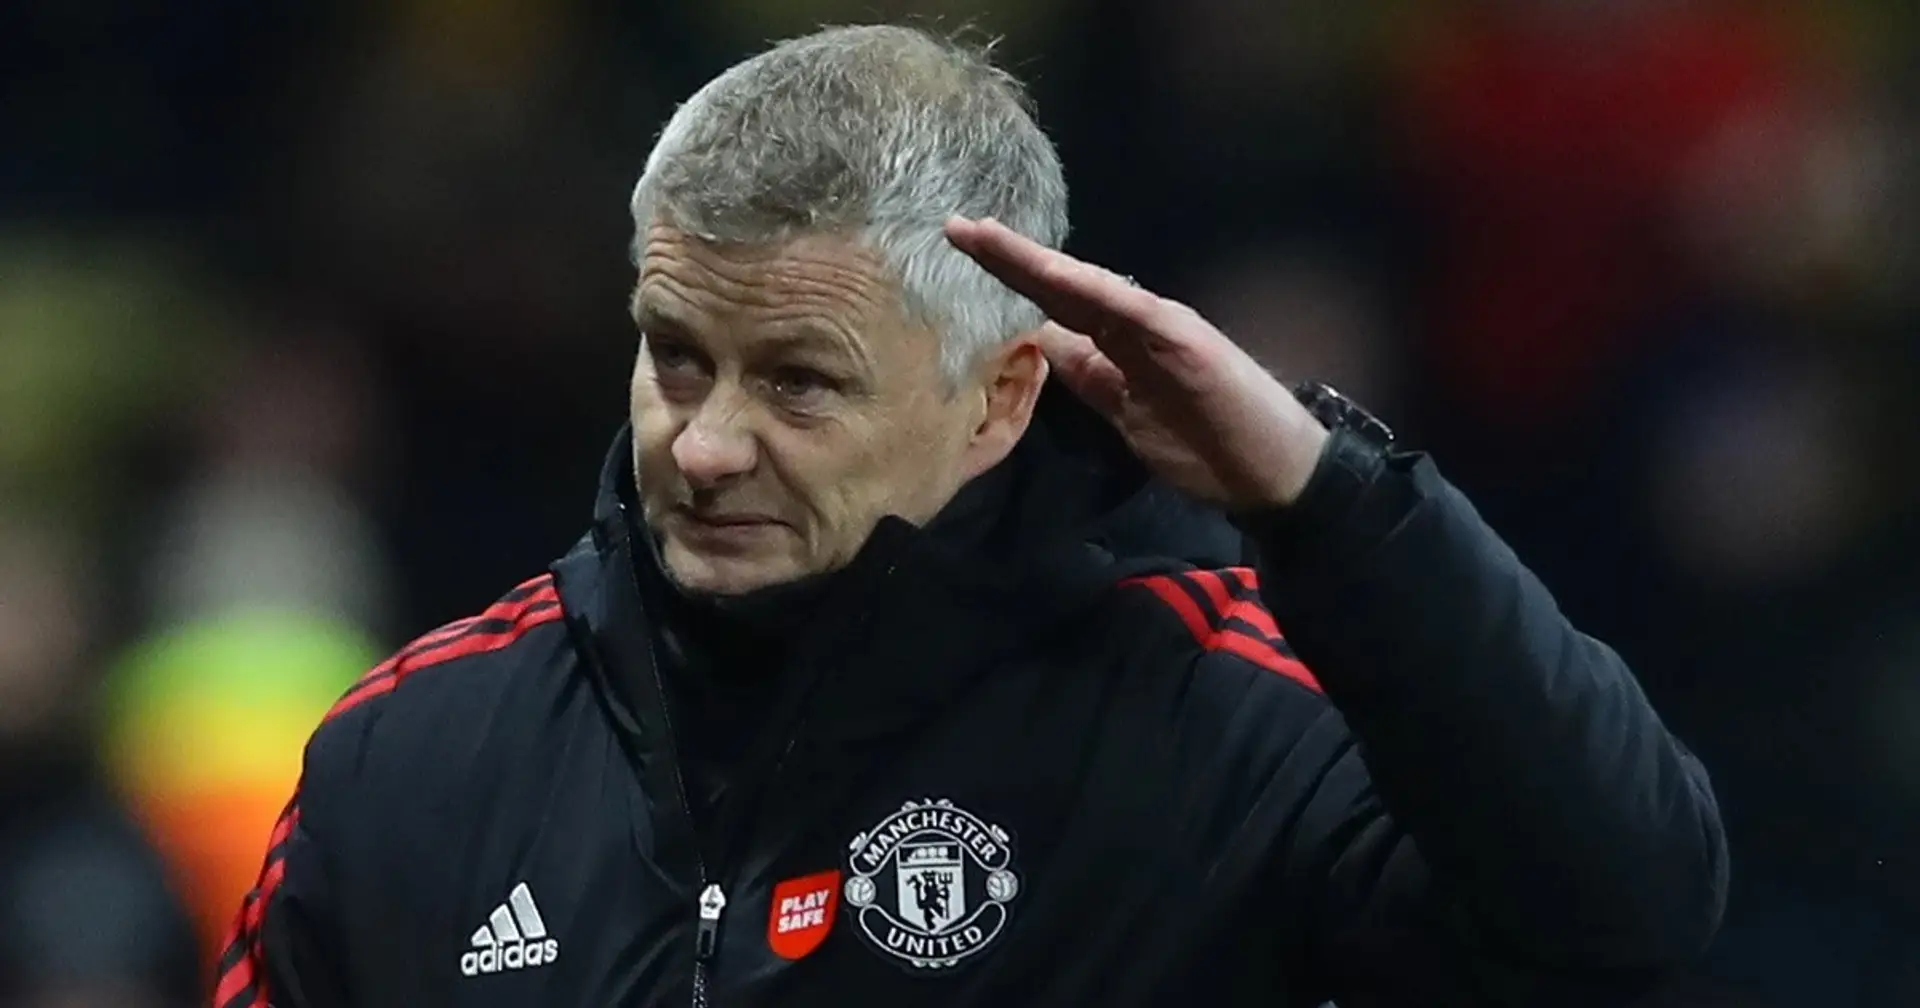 Solskjaer's sacking 'approved by Joel Glazer', possible interim replacement named - Fabrizio Romano